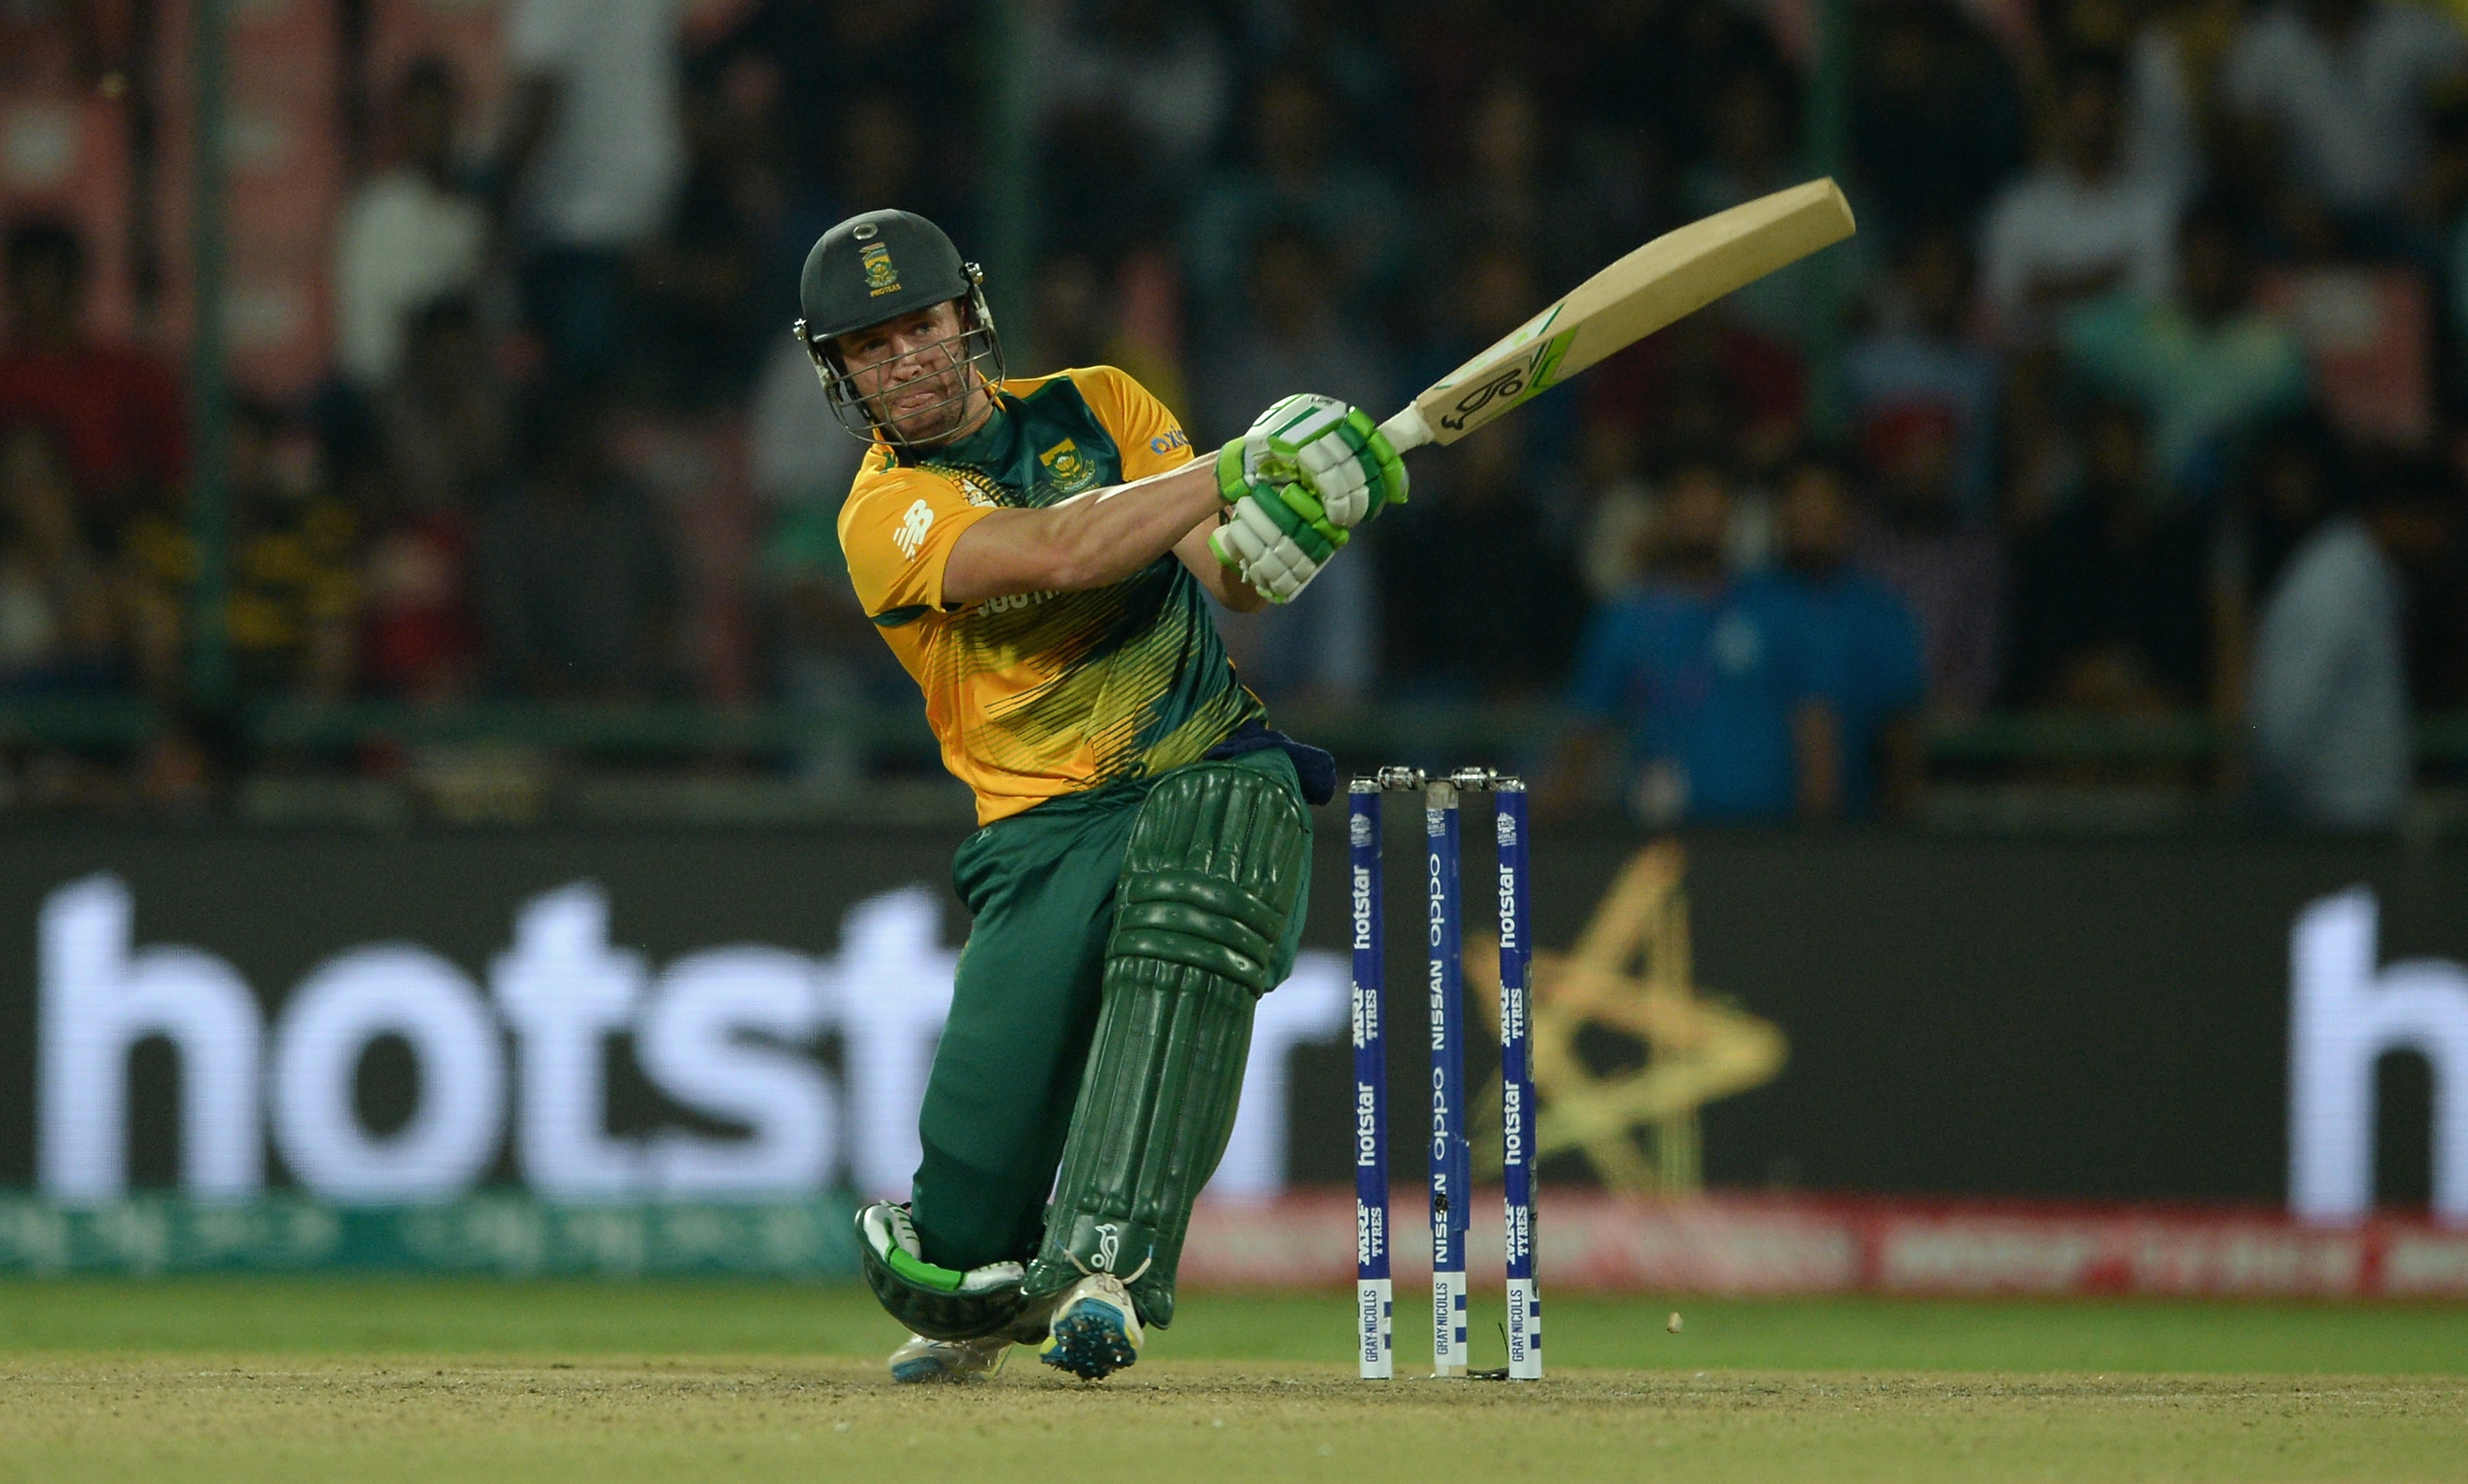 Sehwag's 319 against South Africa was magnificent, says AB de Villers